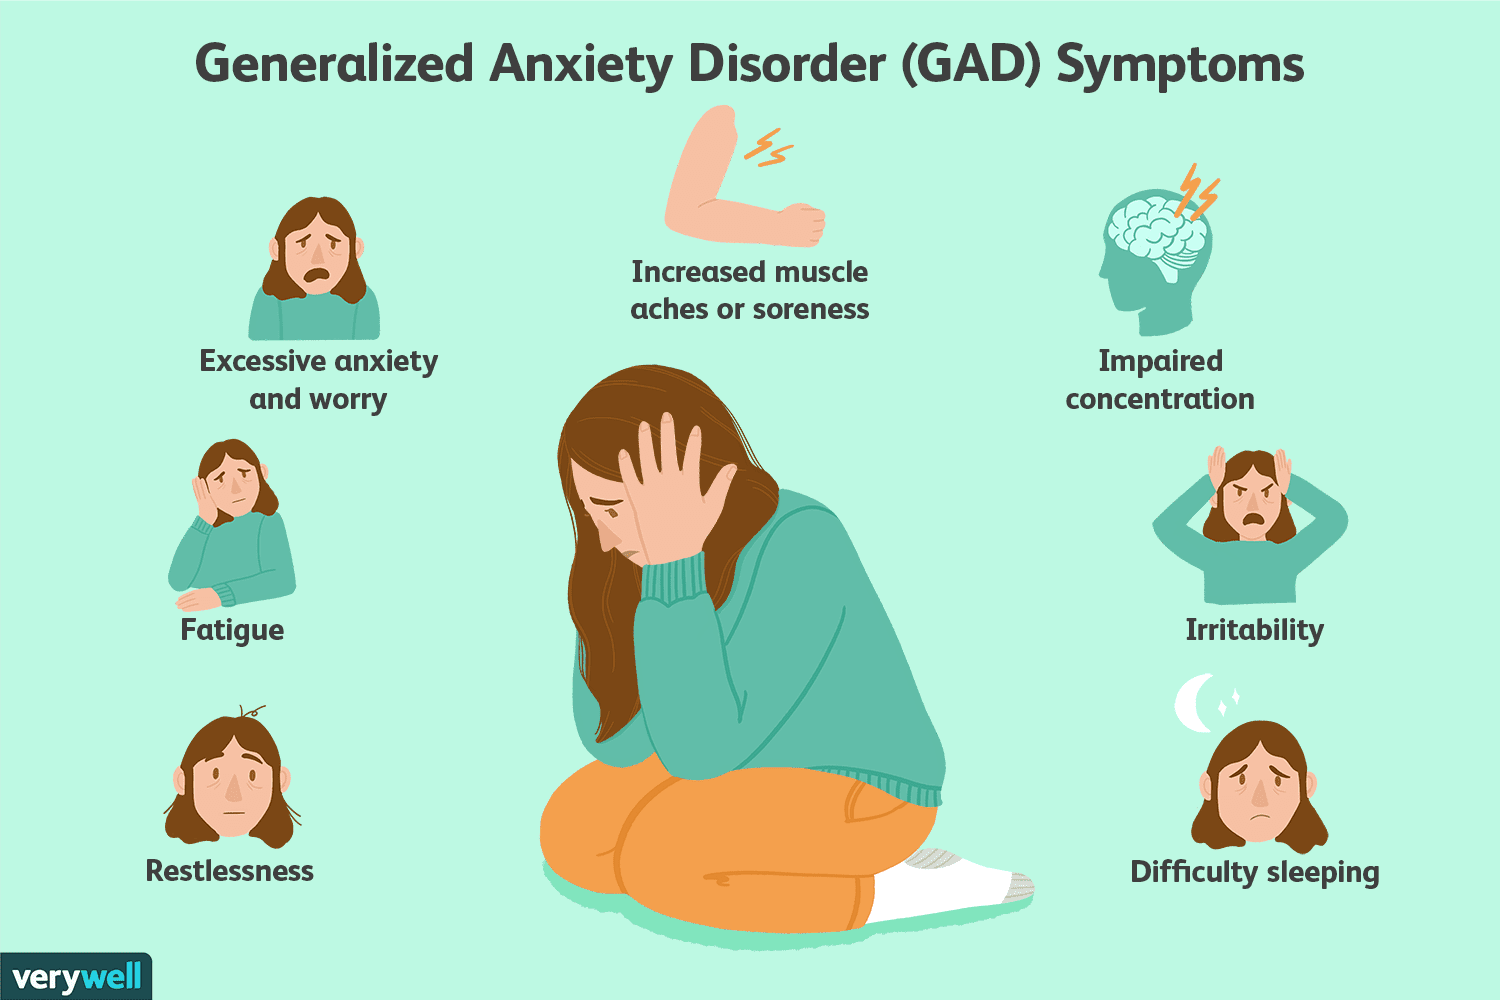 What are the common symptoms of anxiety?